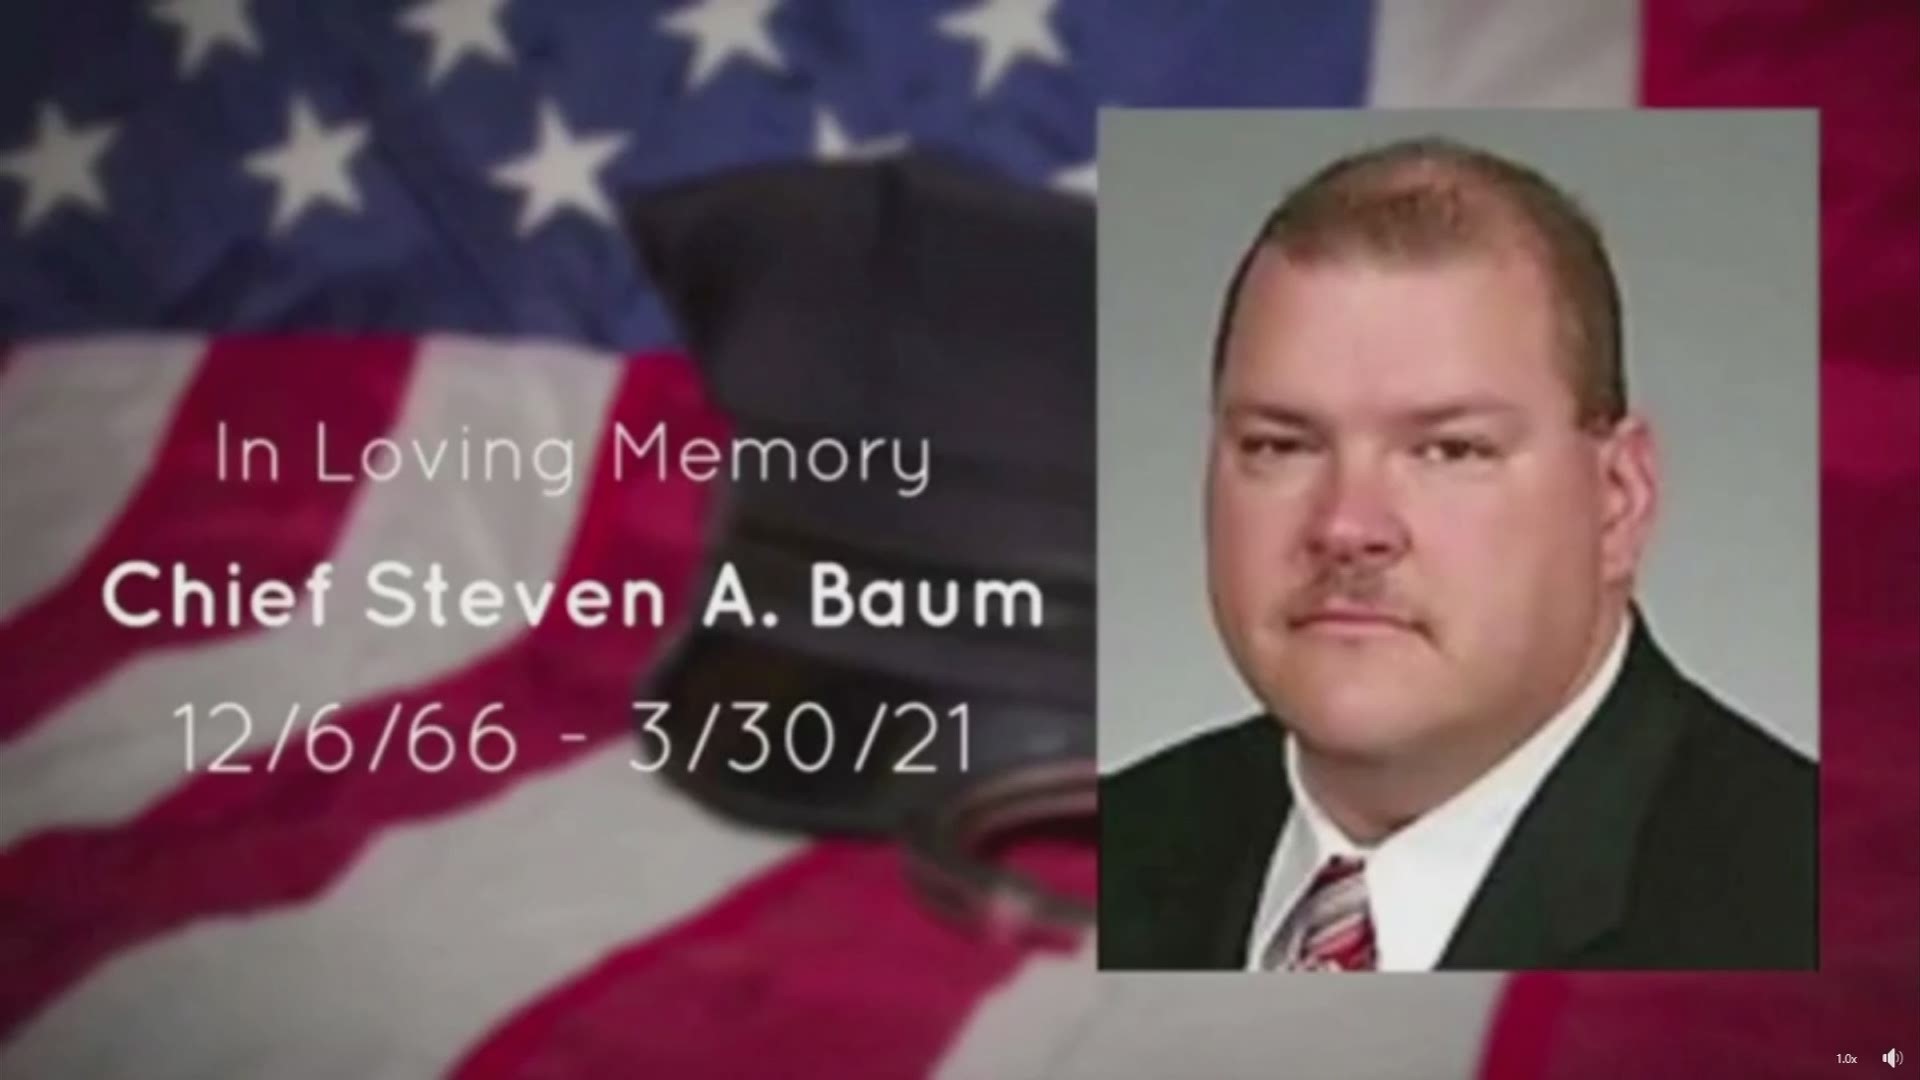 Steven Baum passed away unexpectedly after suffering a medical emergency on March 31.